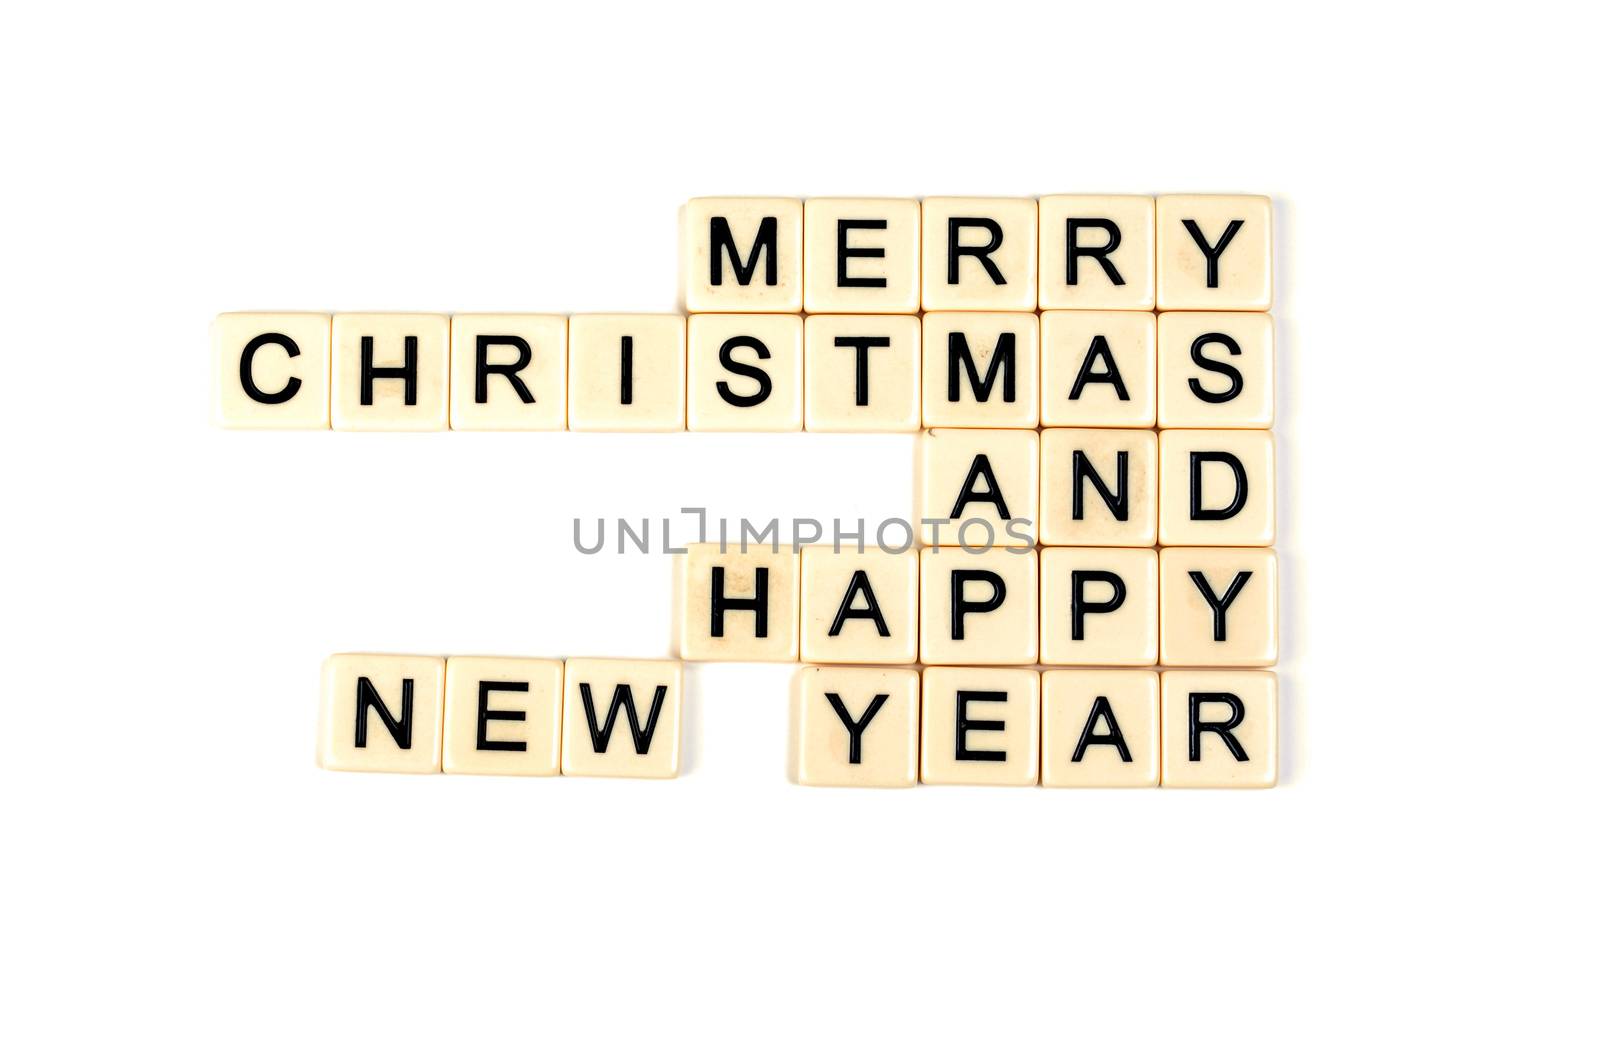 Merry Christmas and Happy New Year on white background